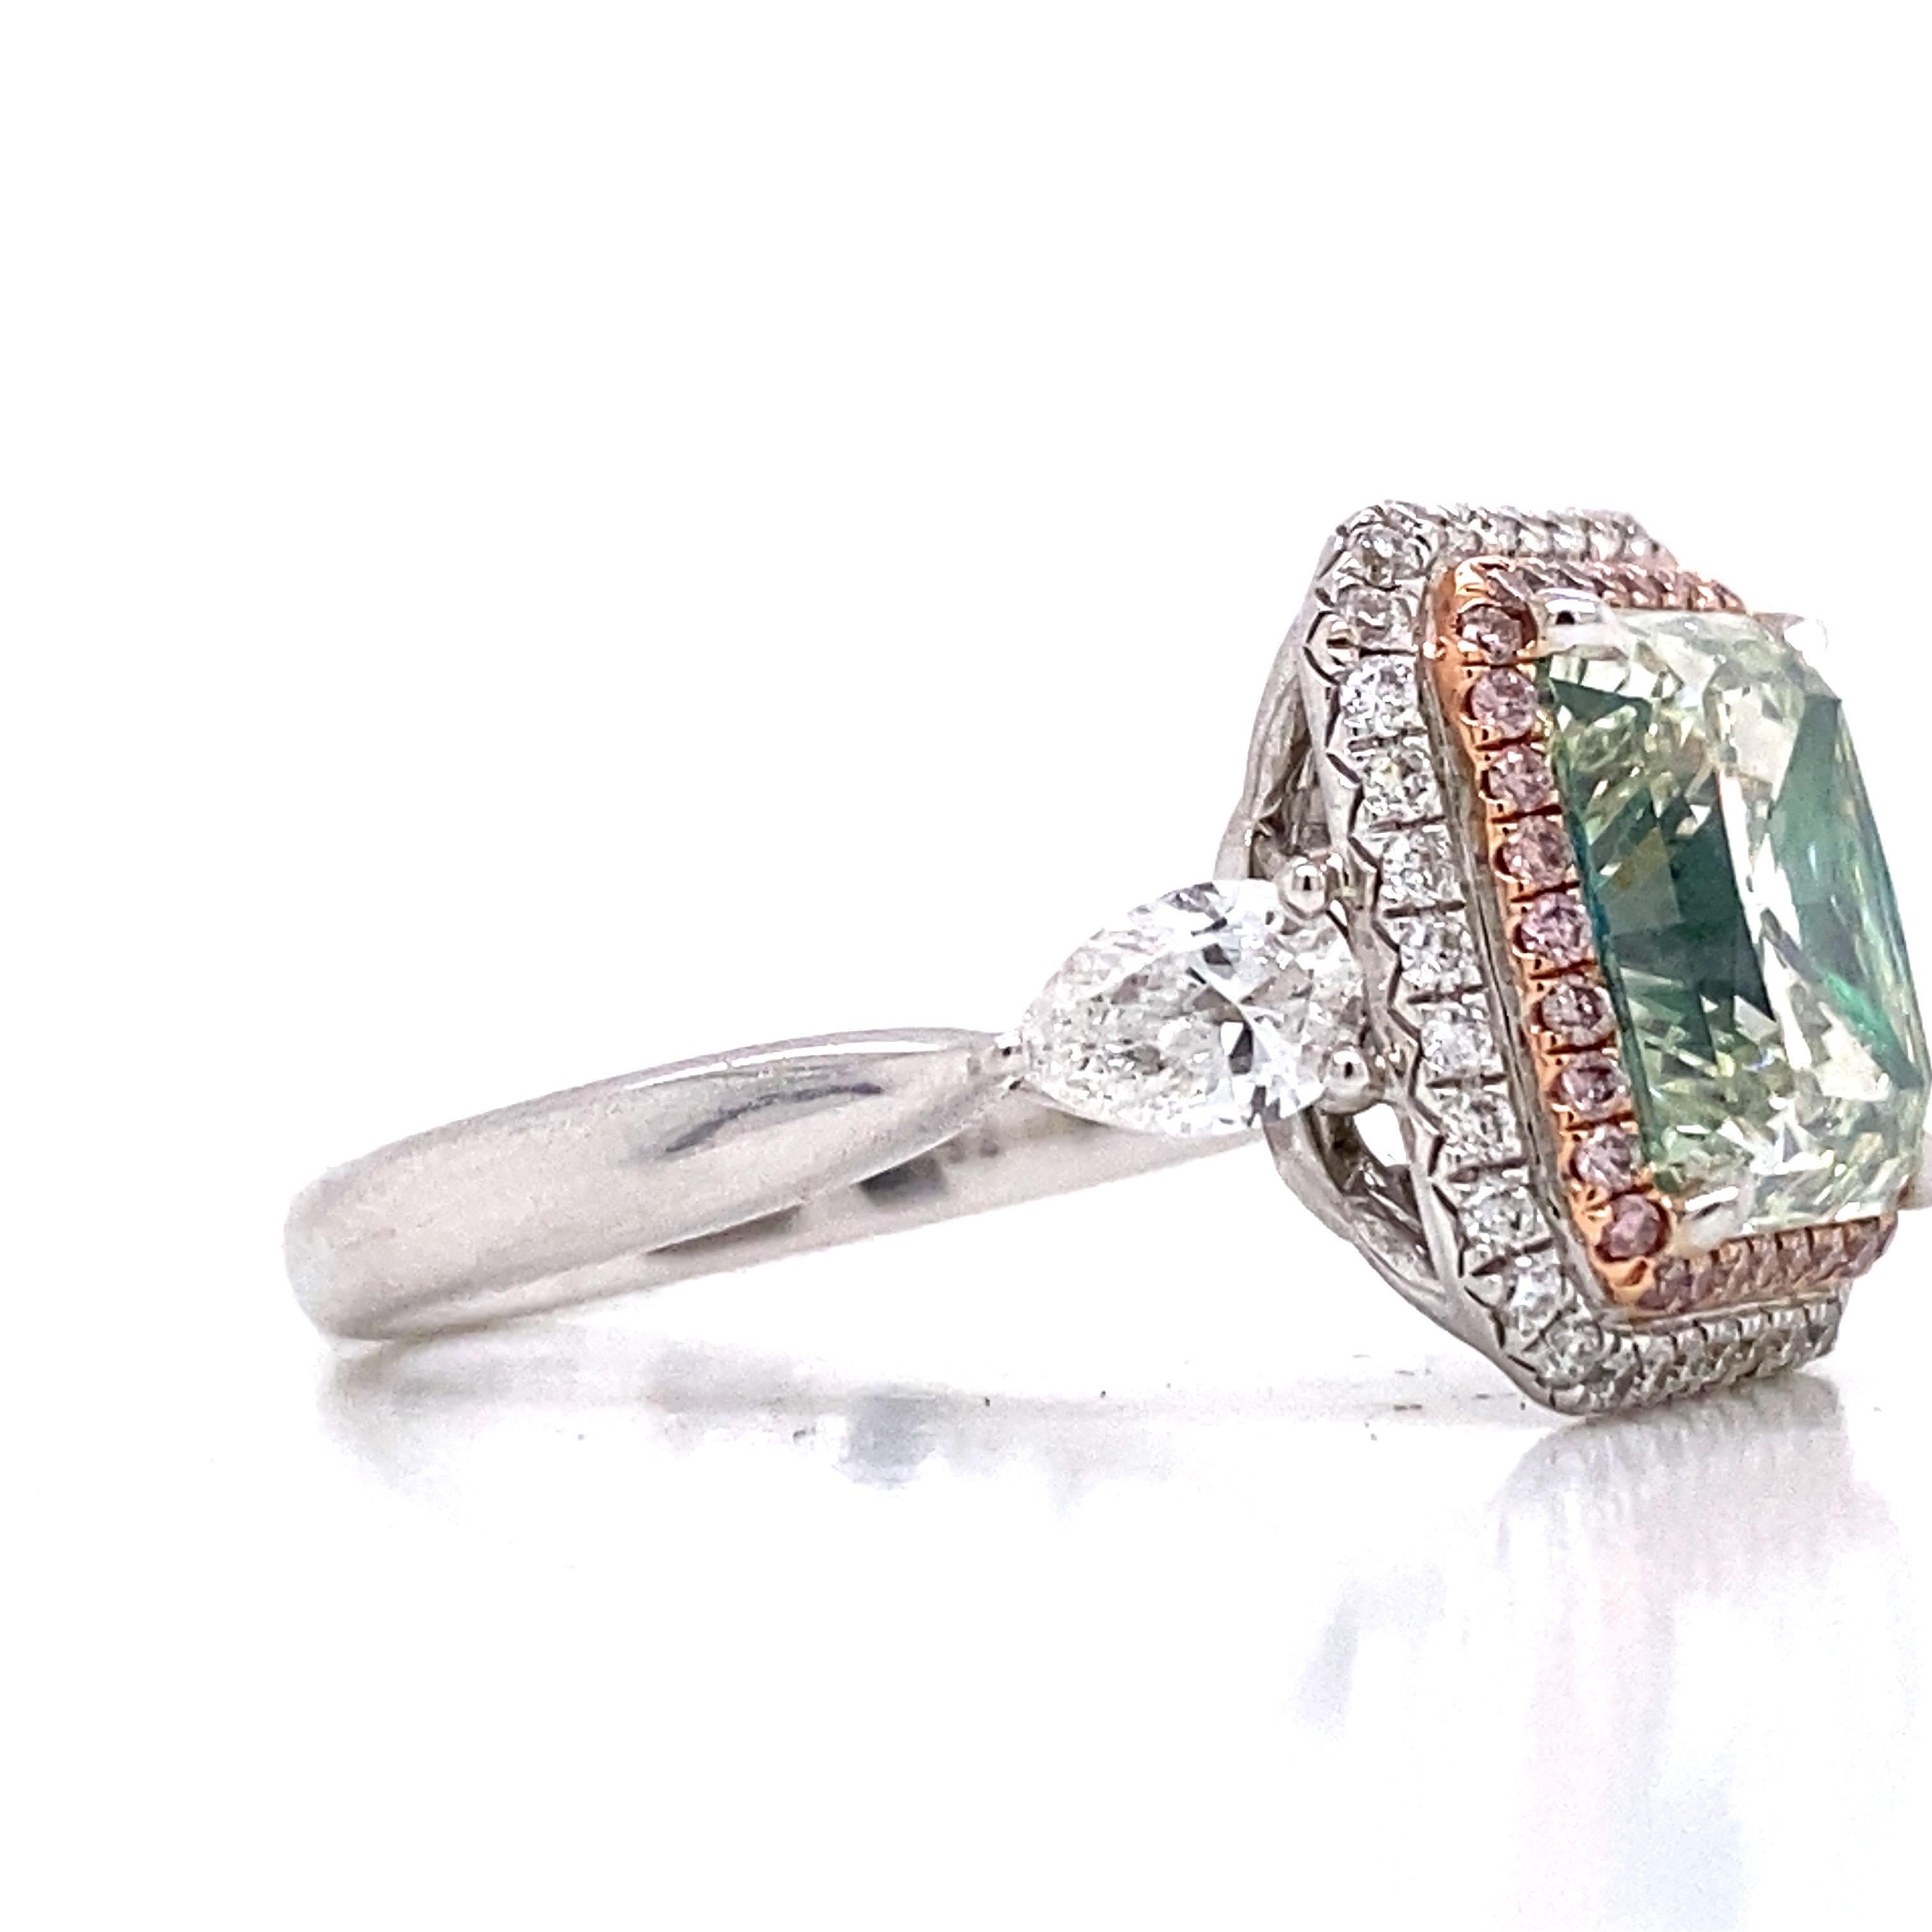 From The Vault at Emilio Jewelry Located on New York's iconic Fifth Avenue,
Showcasing a very special and rare Gia certified natural Greenish Diamond weighing over 4.00 carats. Please inquire for details. 
We specialize in creating special mountings